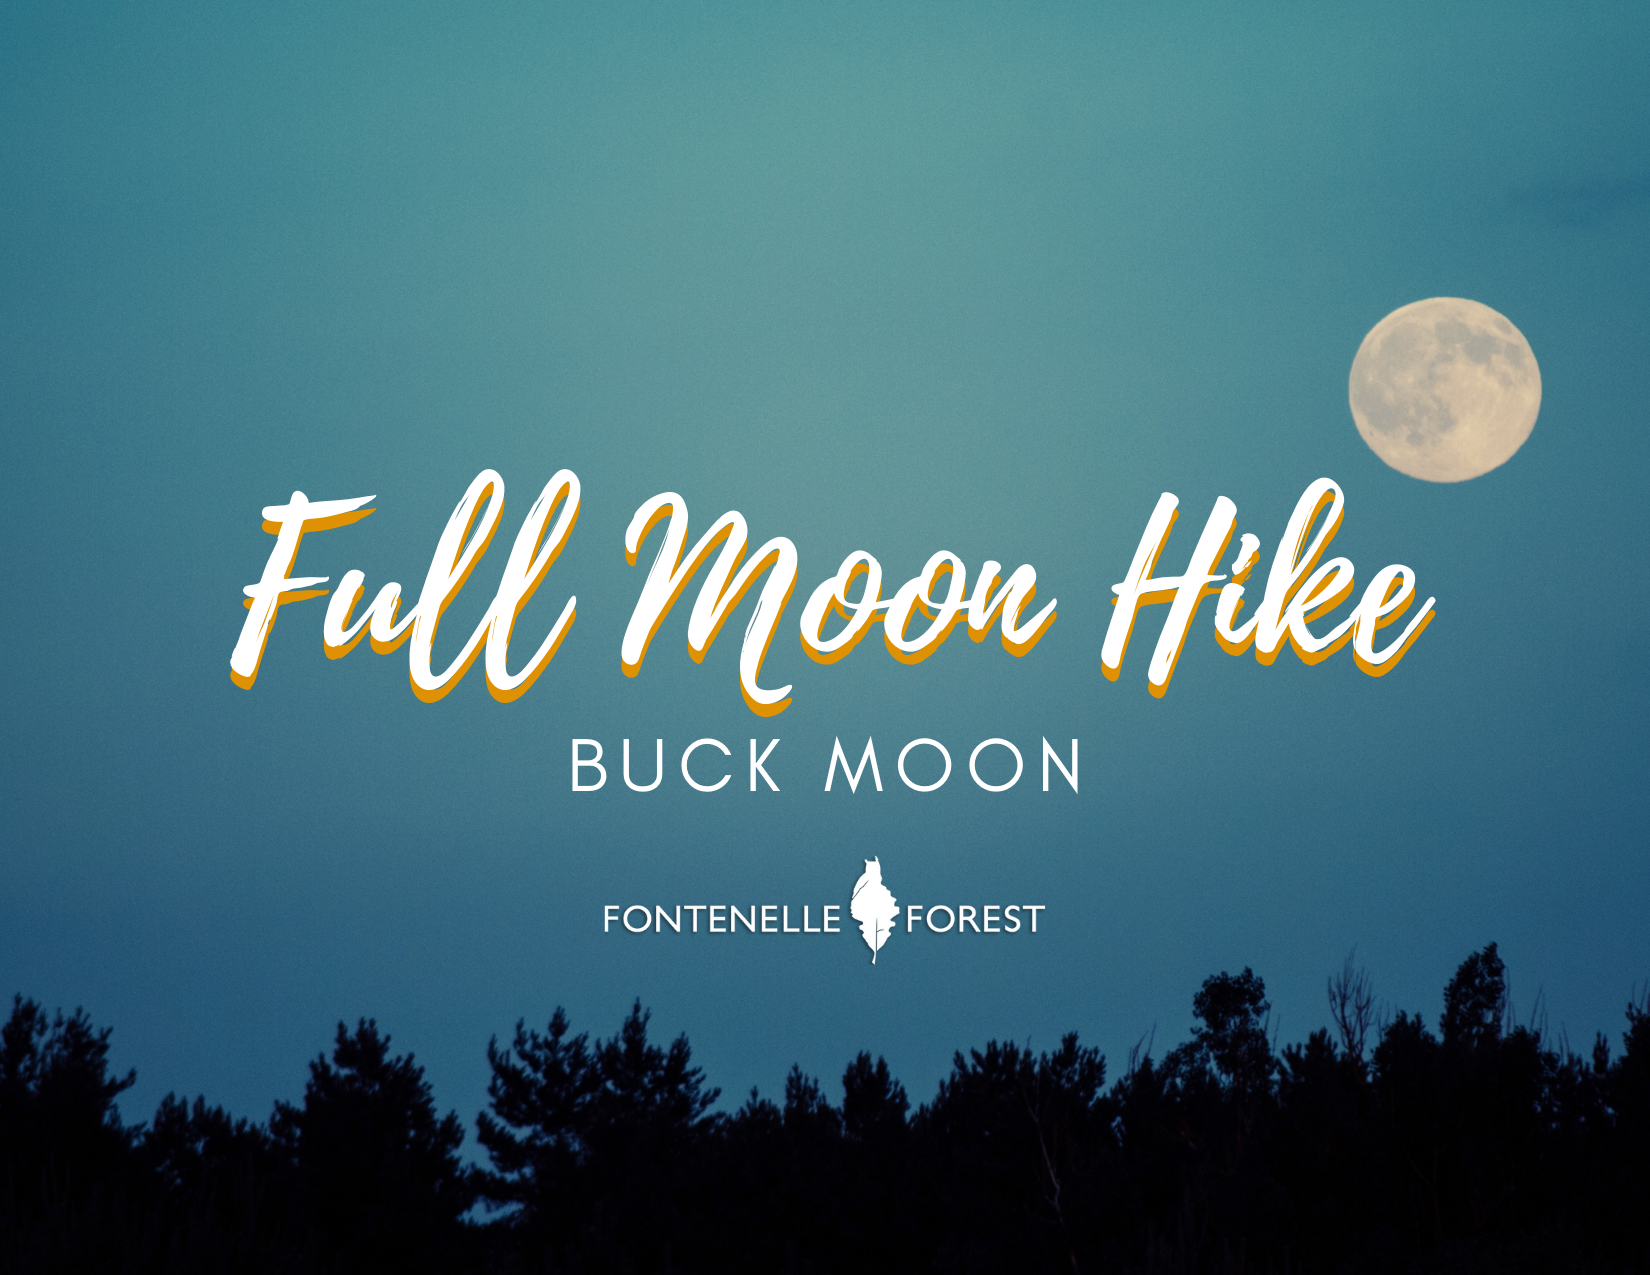 Pictures a dark blue sky at night with silhouettes of trees and a full moon. The text in cream is "Full Moon Hike" then on the next line "BUCK MOON", with the Fontenelle Forest logo in white underneath.